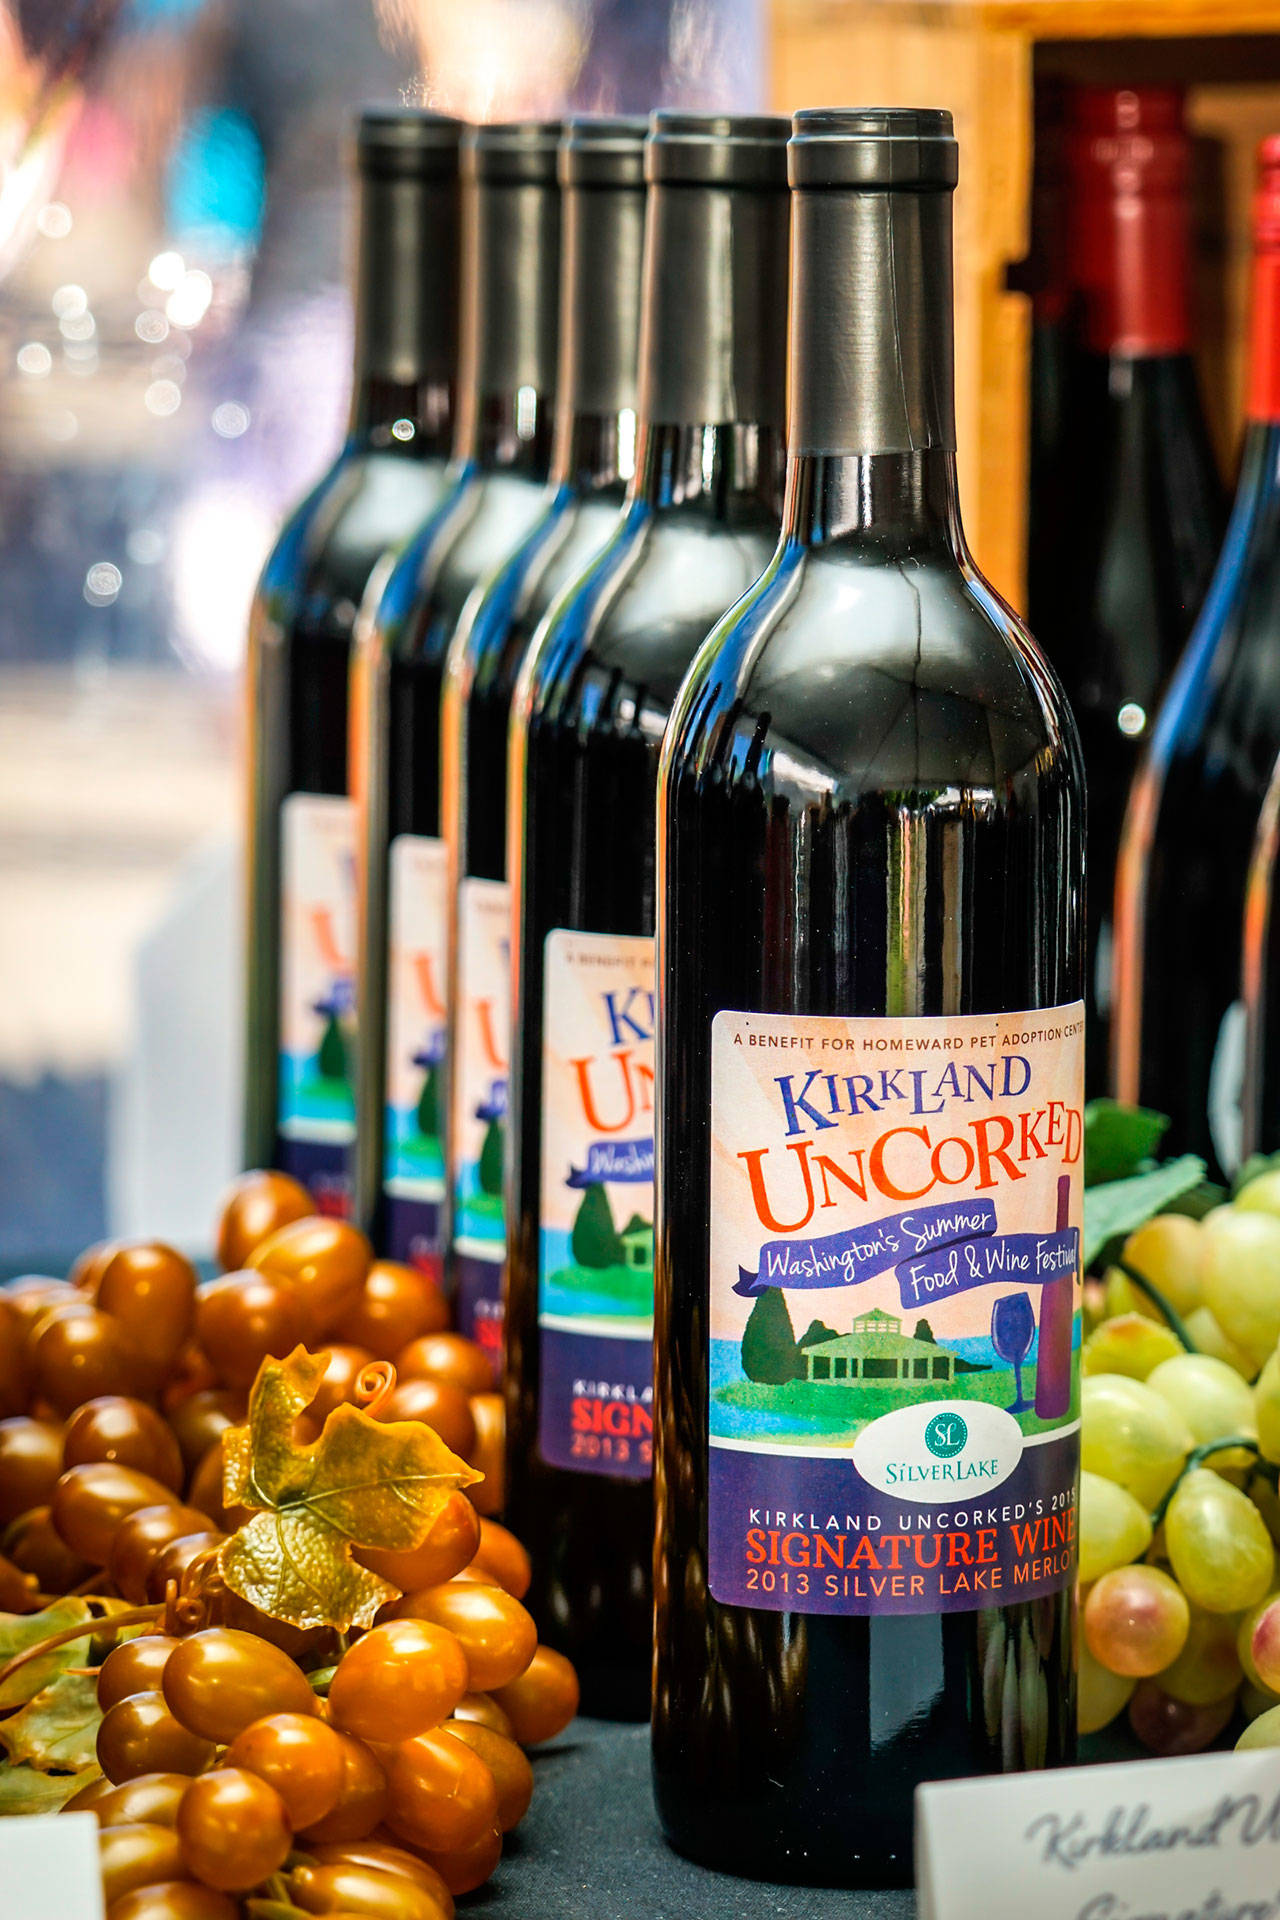 Kirkland Uncorked returns for 11th year